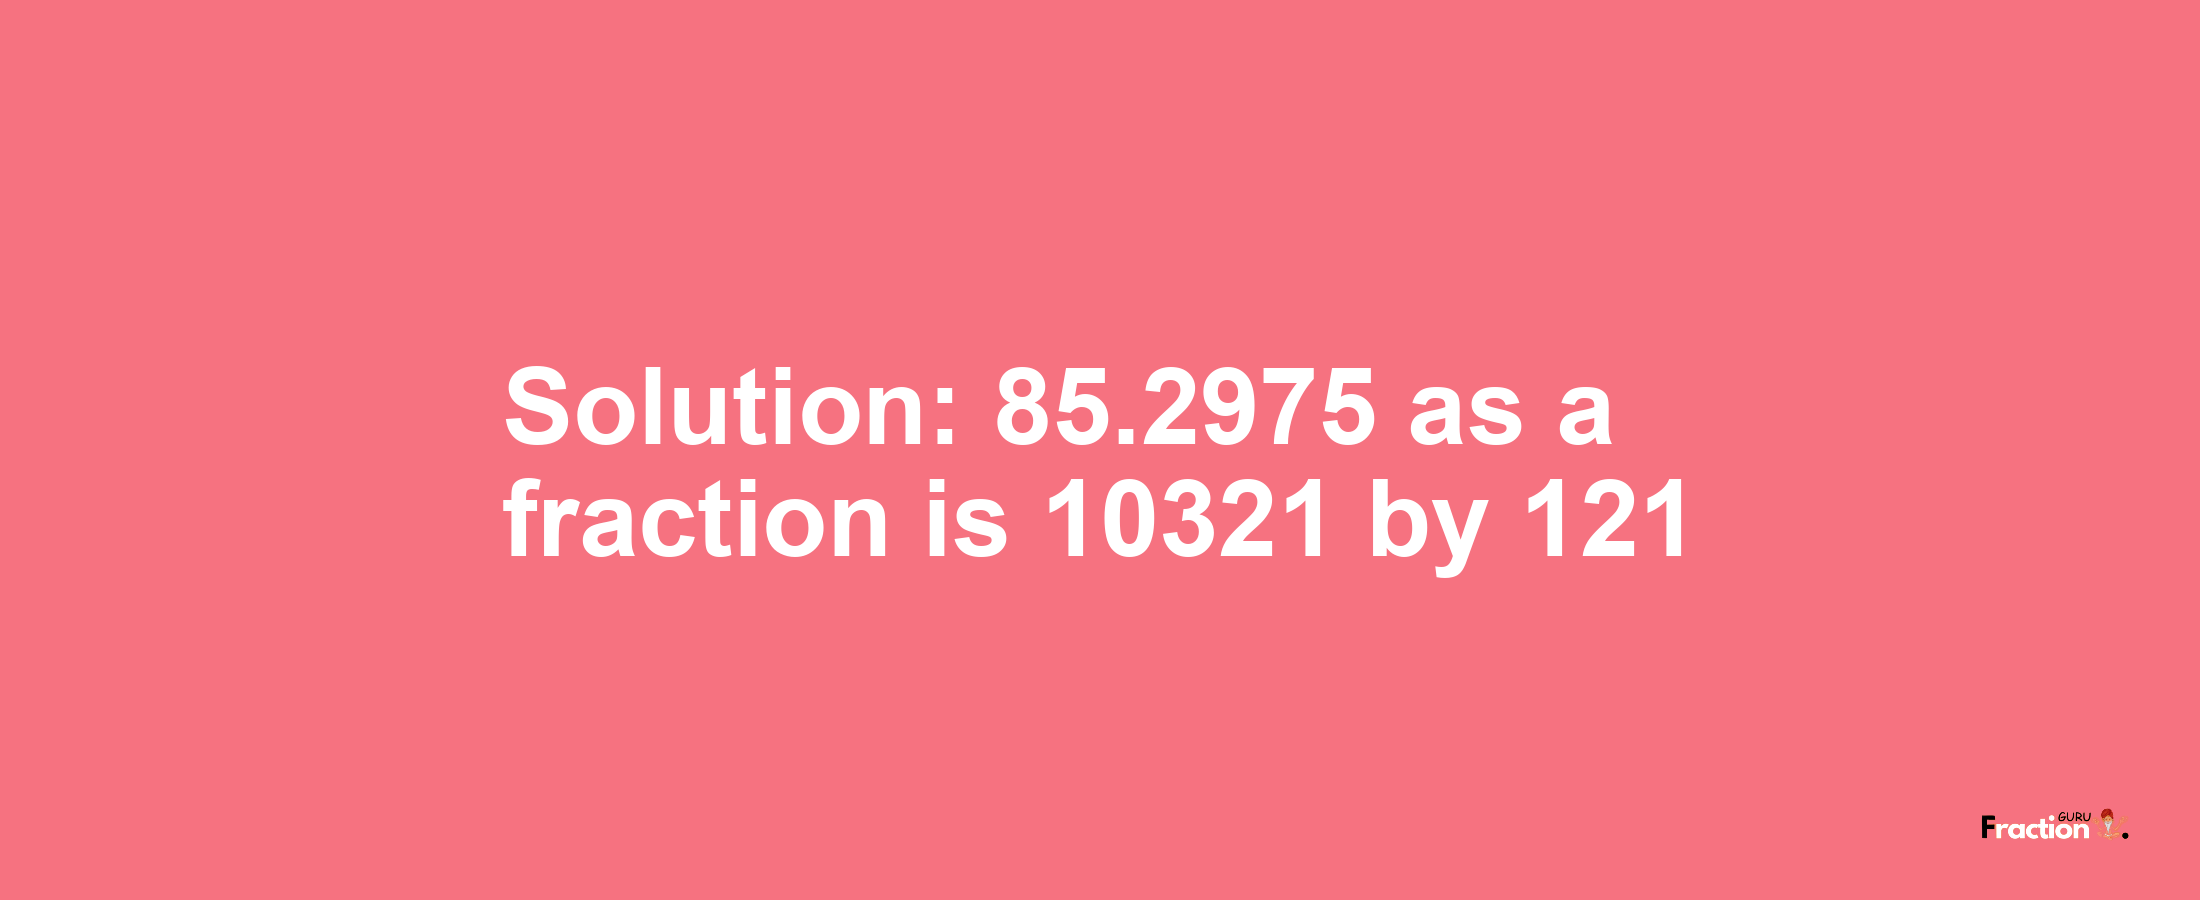 Solution:85.2975 as a fraction is 10321/121